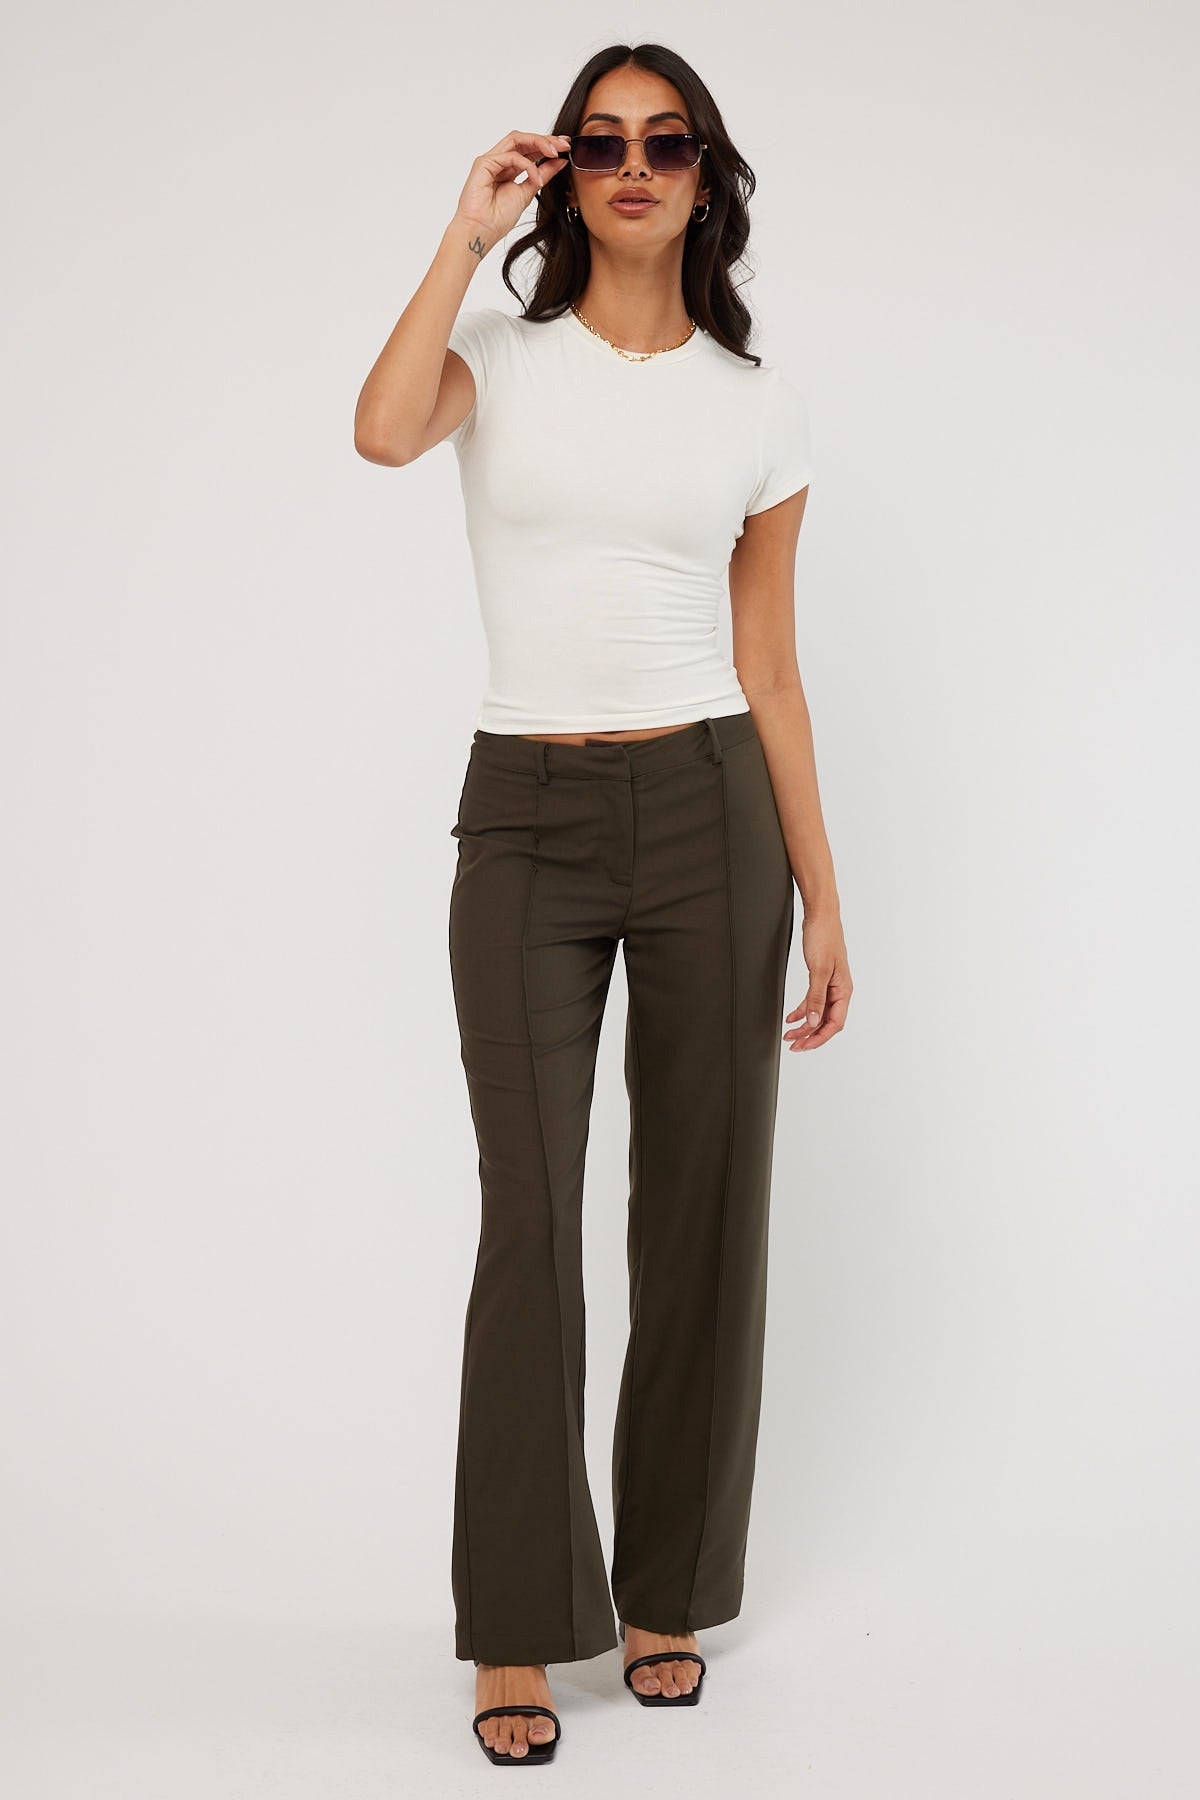 Perfect Stranger Atmosphere Lowrise Tailored Pant Green